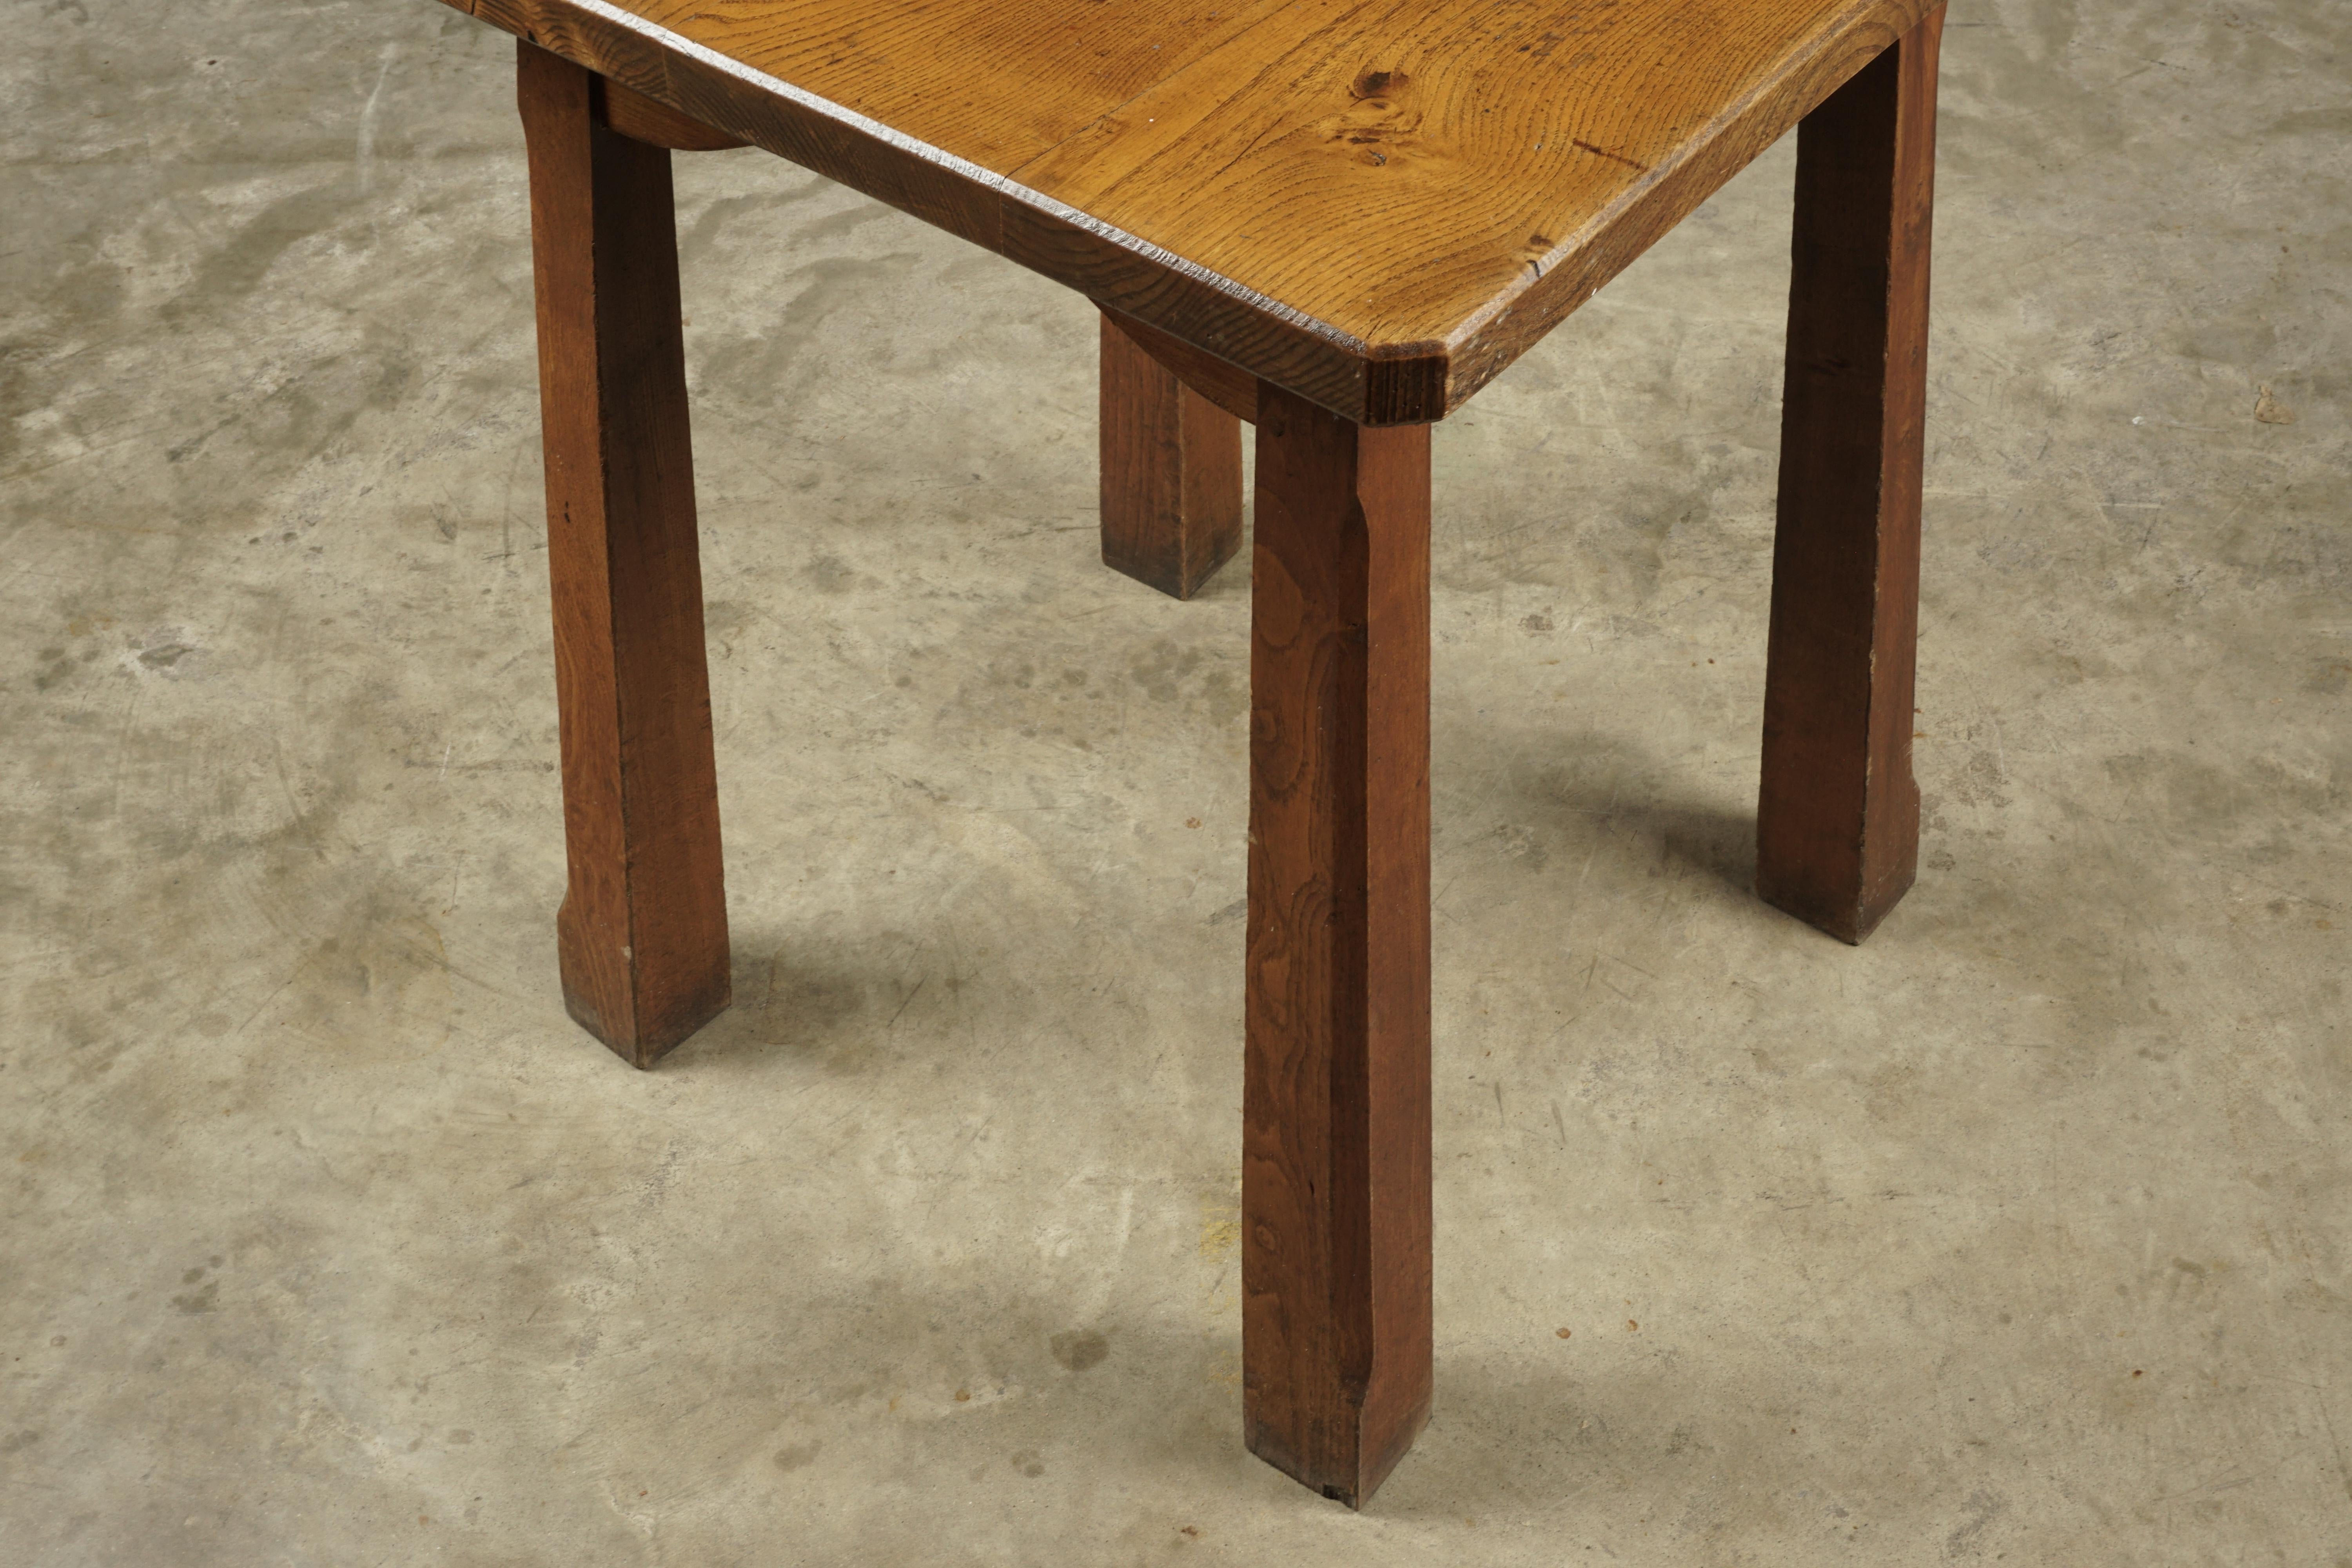 Mid-20th Century Vintage Pine Reconstruction Table from France, circa 1950